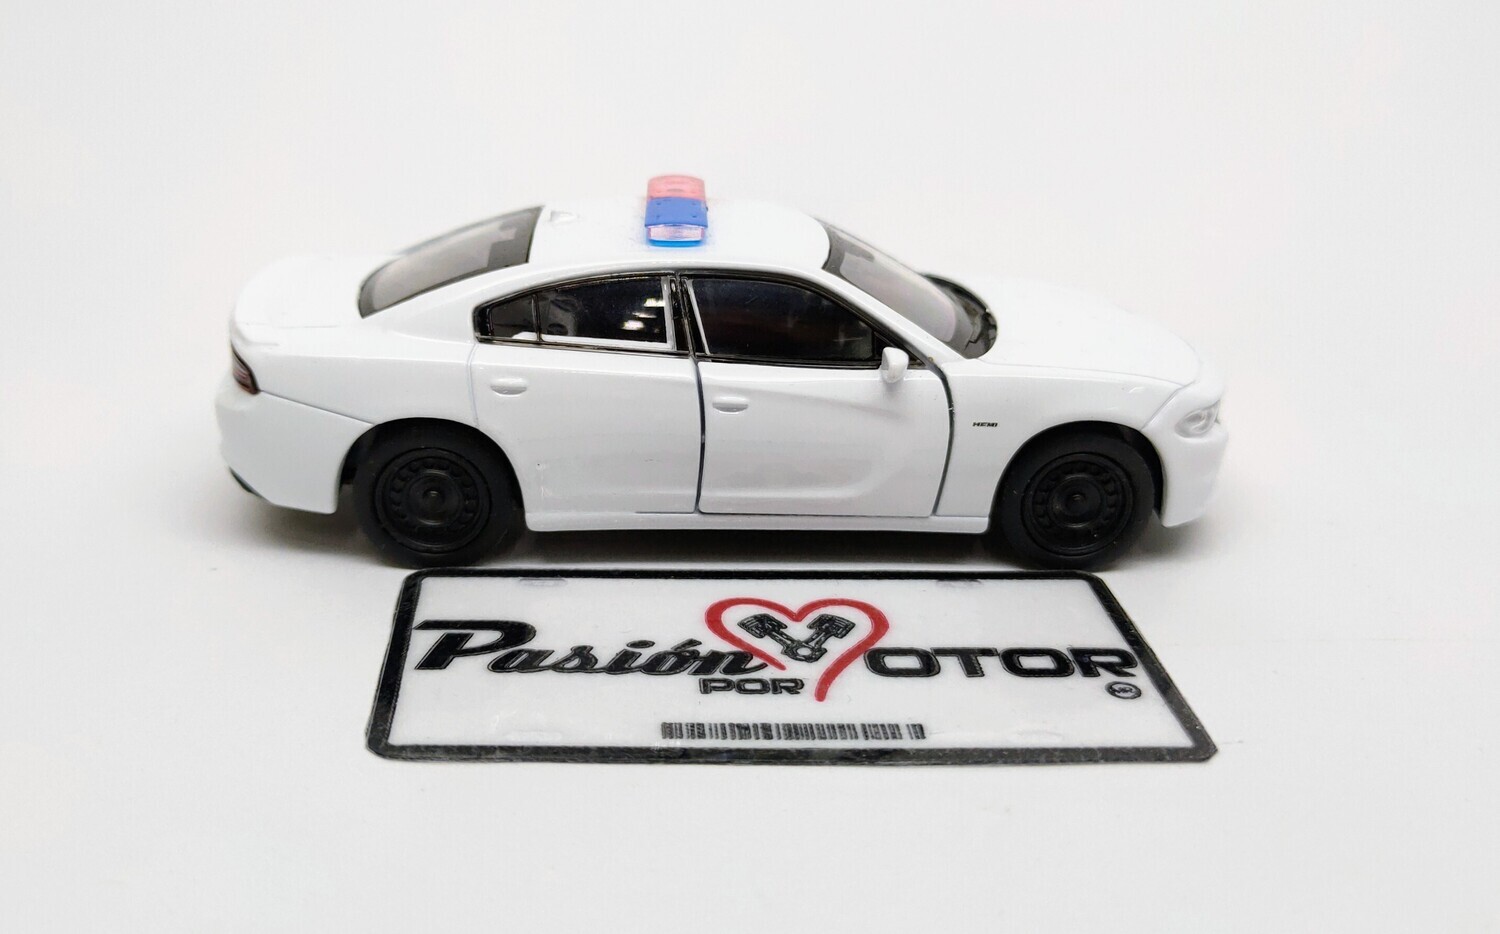 1:43 Dodge Charger R/T 2016 Pursuit Police Patrulla Welly En Display a Granel